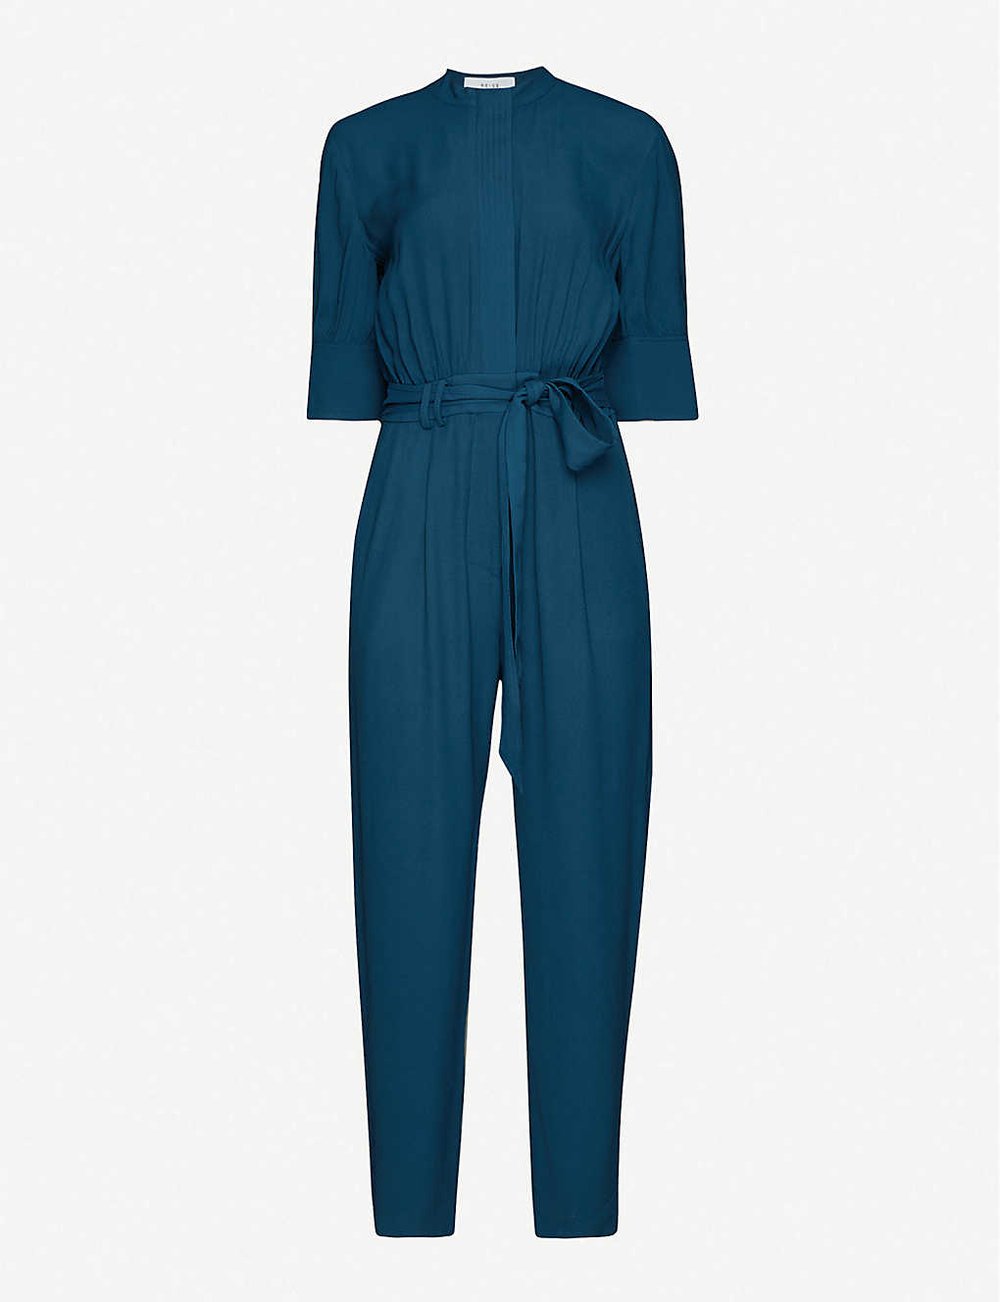 Reiss Freya Utility Jumpsuit in Teal — UFO No More